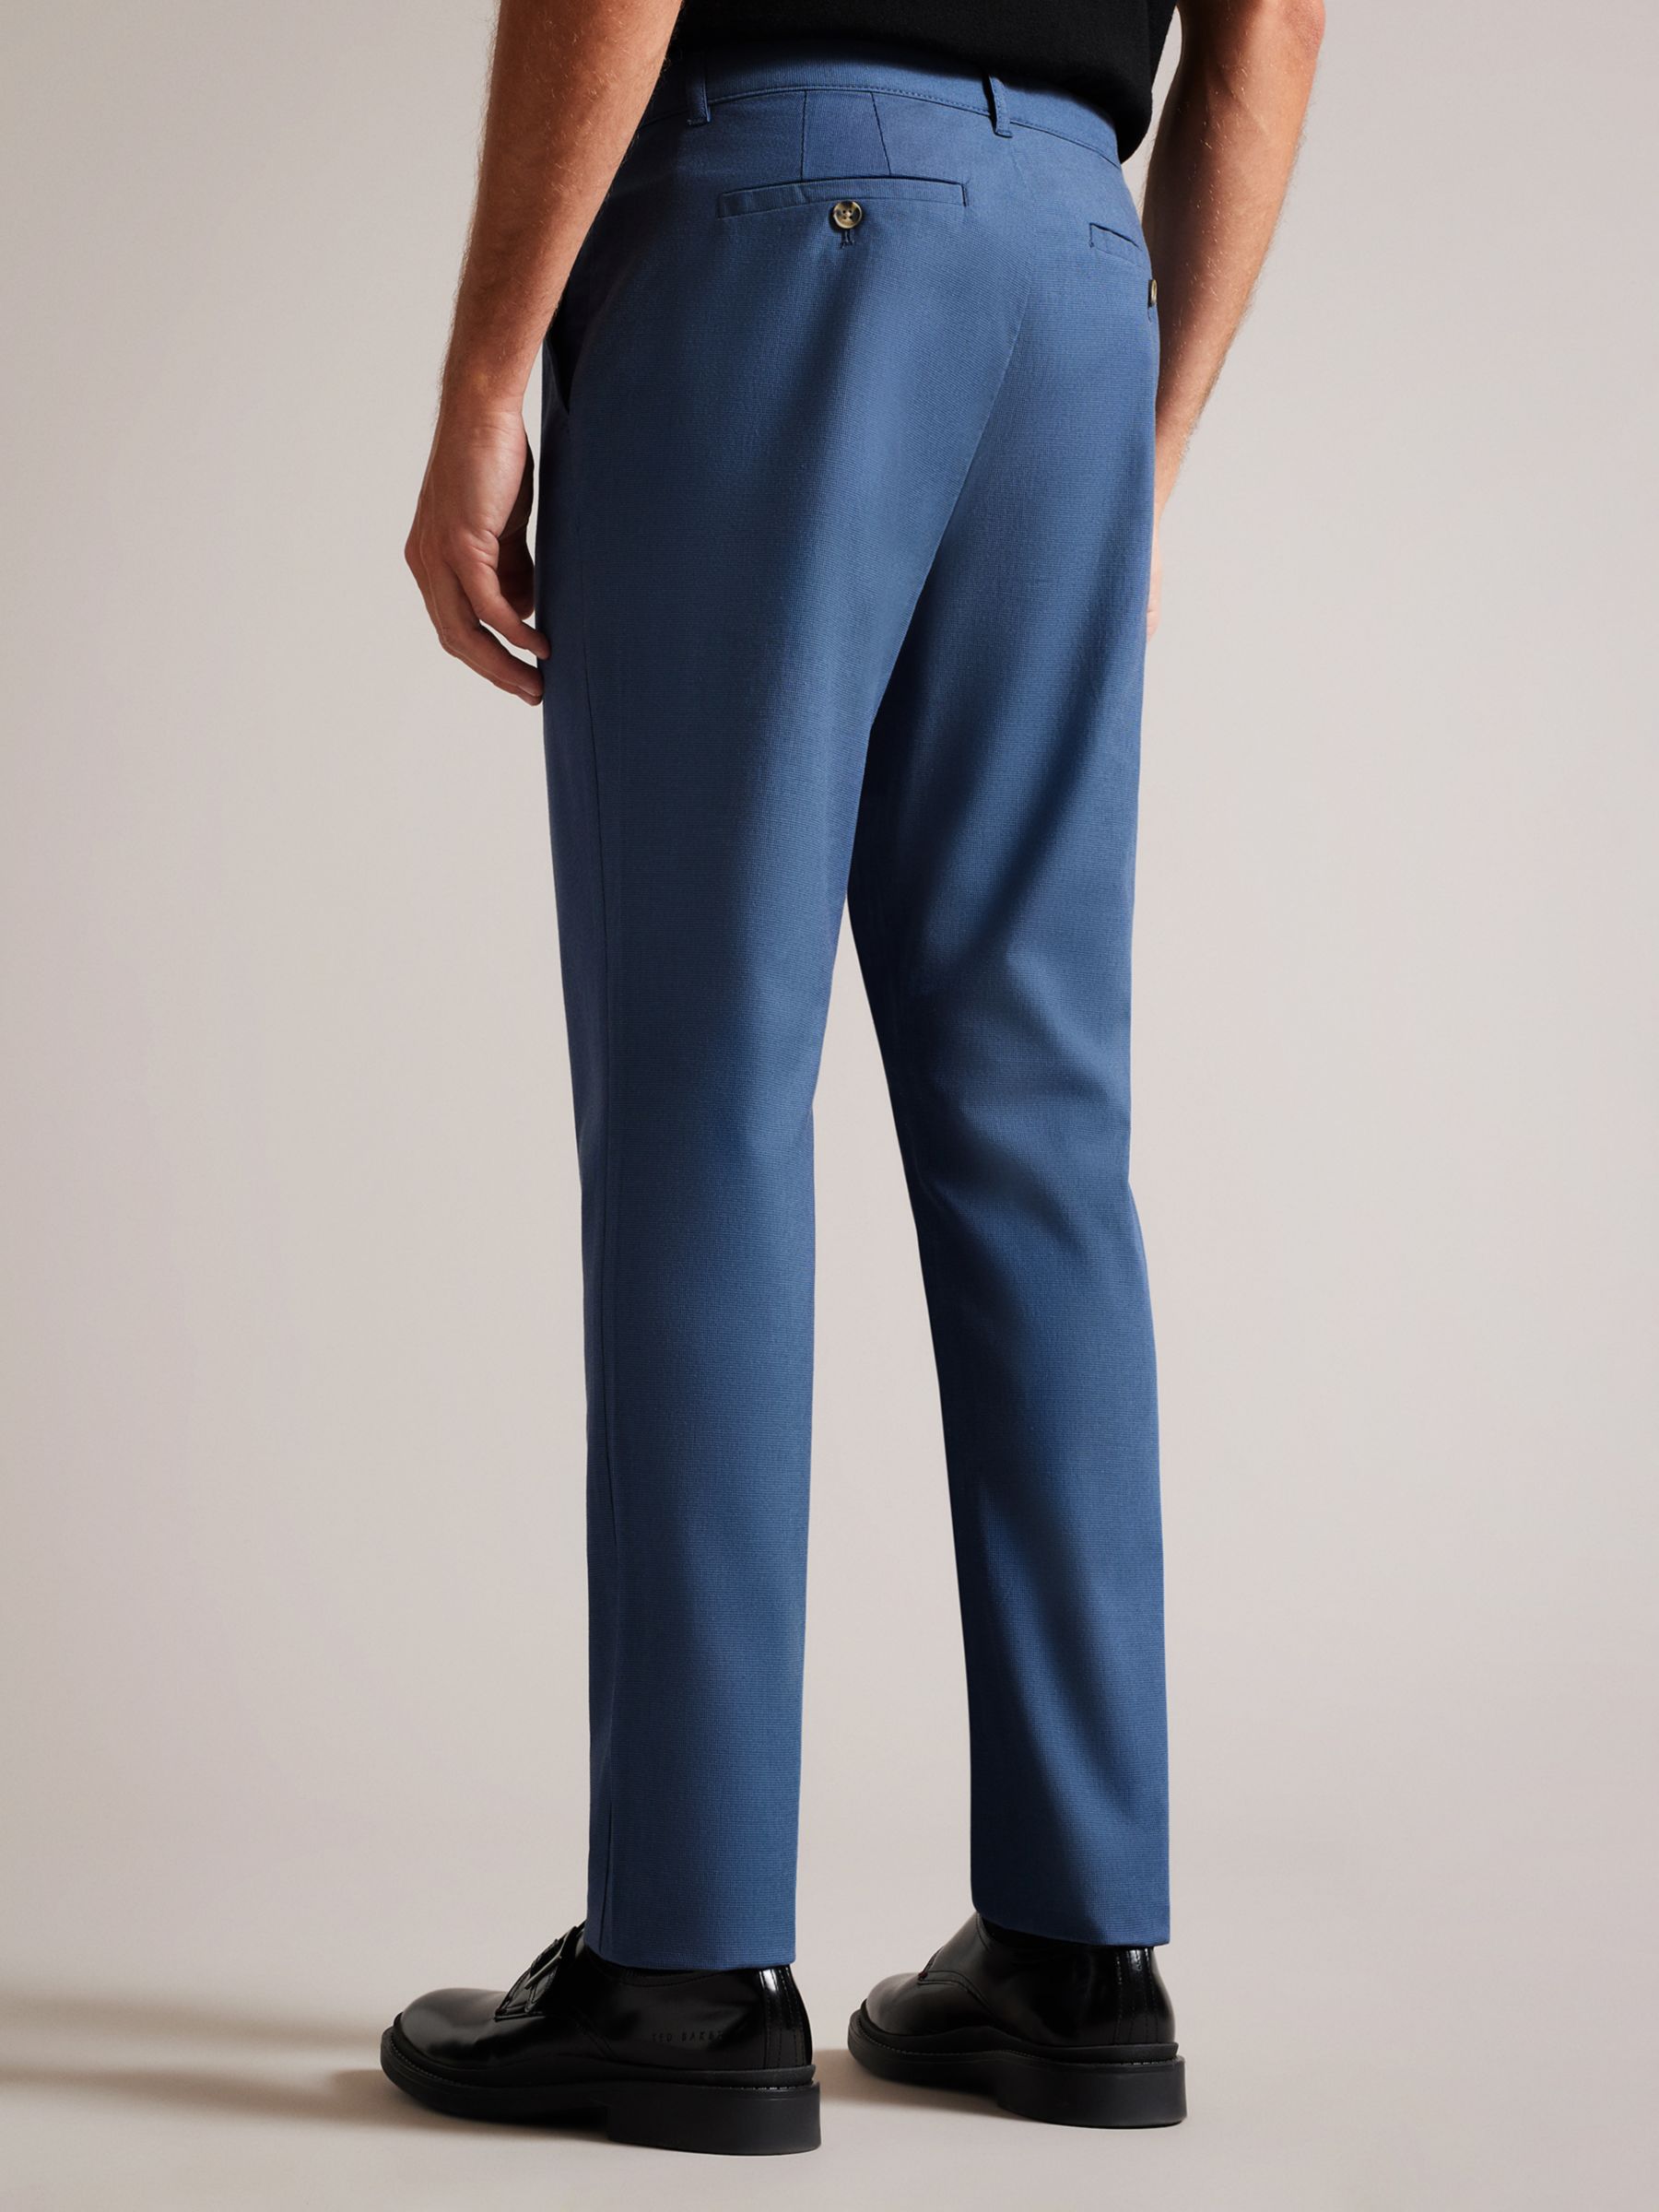 Ted Baker Portmay Slim Fit Dogtooth Trousers, Navy at John Lewis & Partners